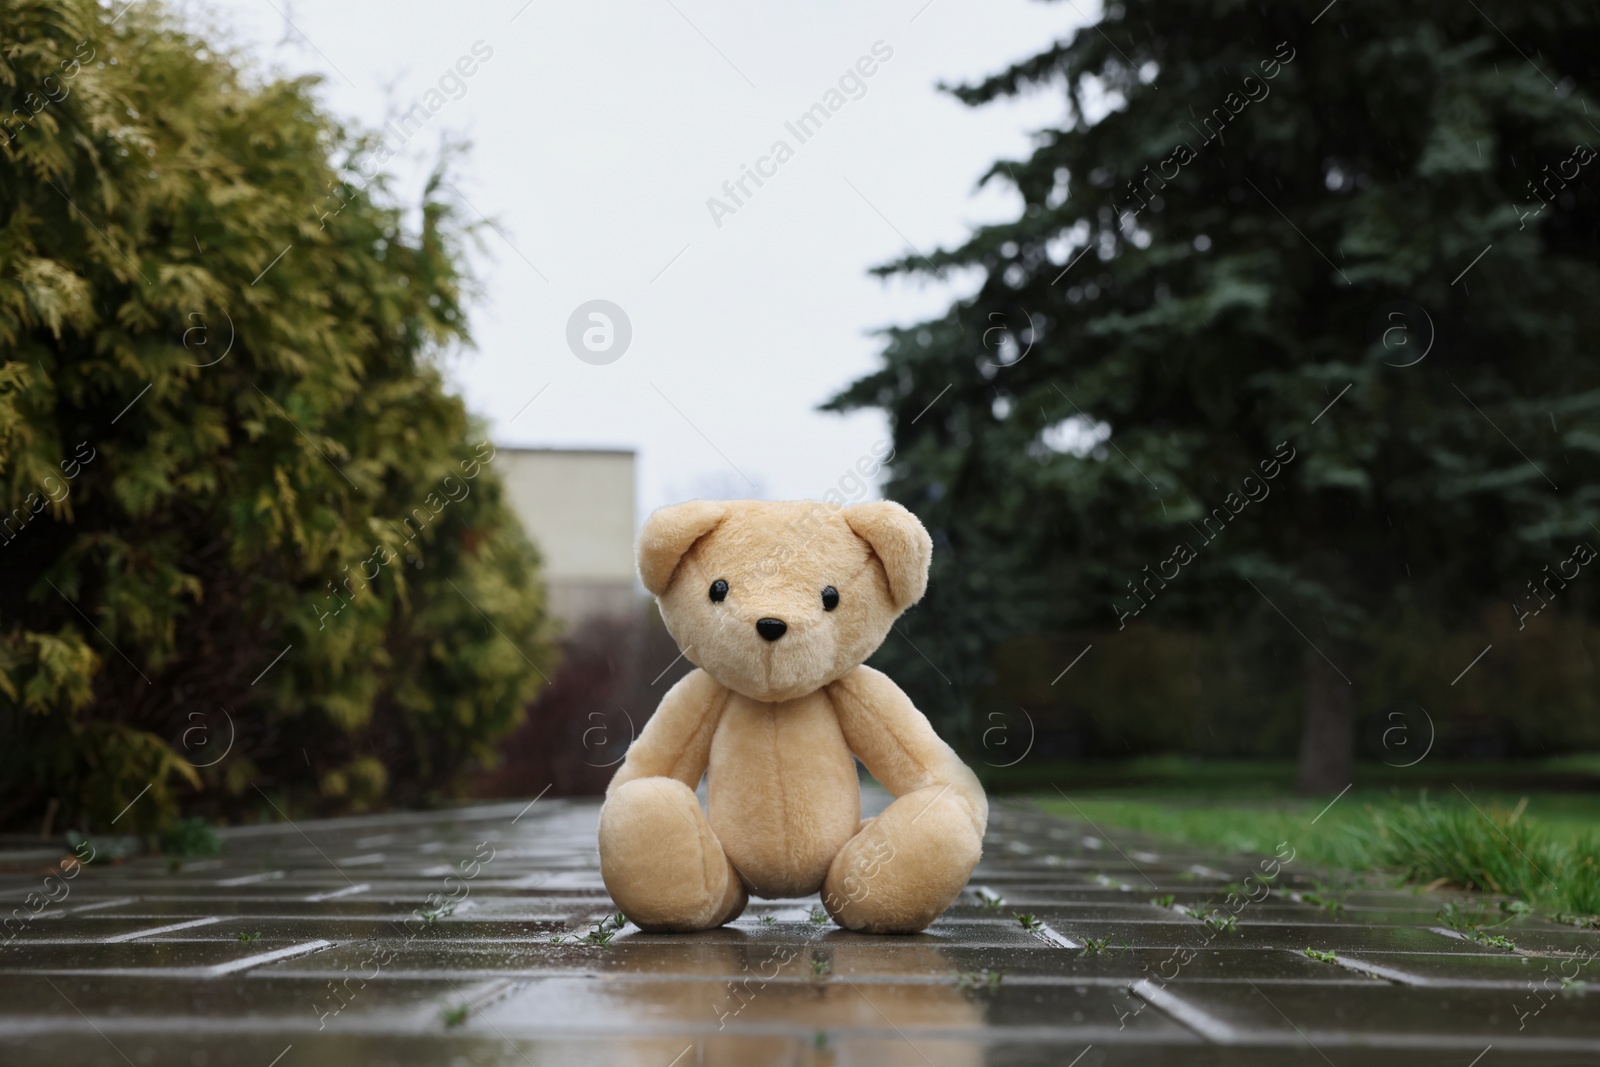 Photo of Lonely teddy bear on stone sidewalk outdoors